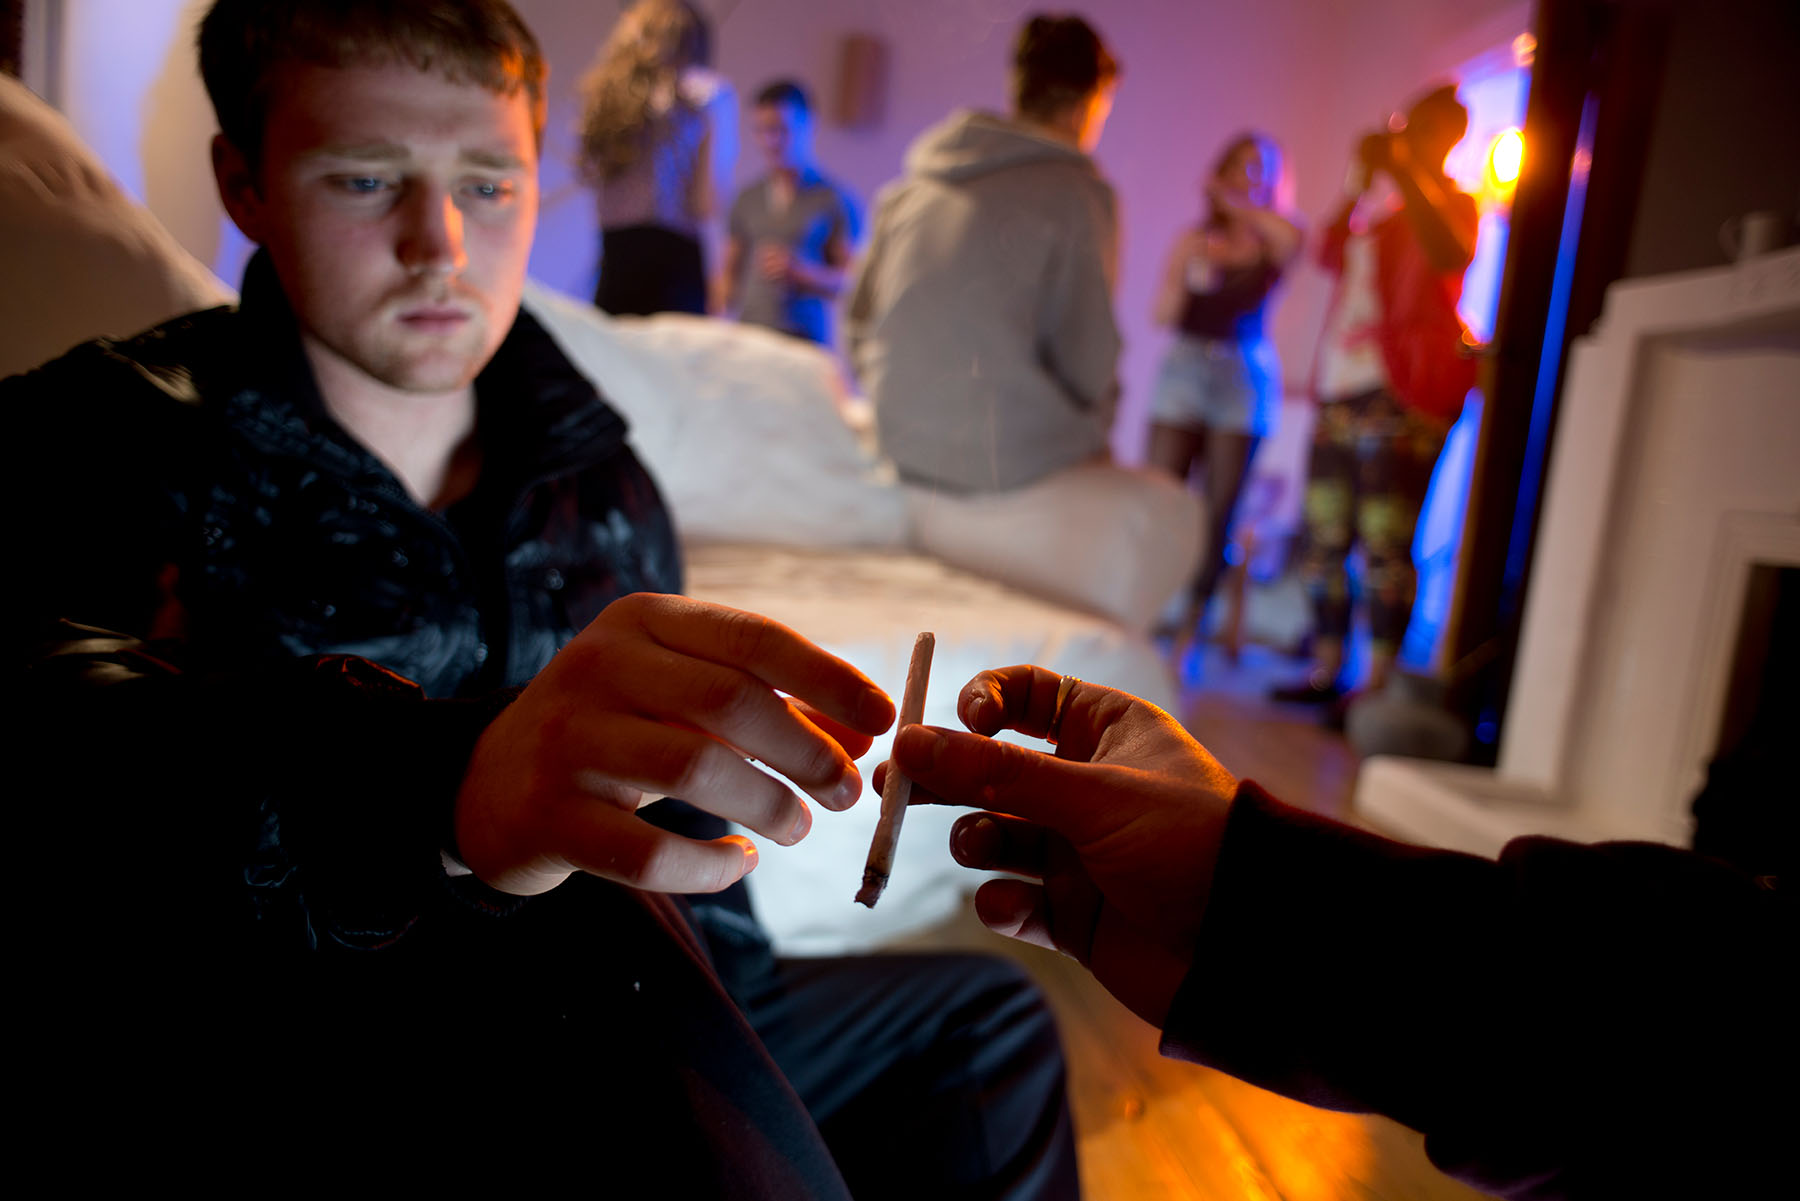 Teen boys in foreground at at party sharing a marijuana cigarette.